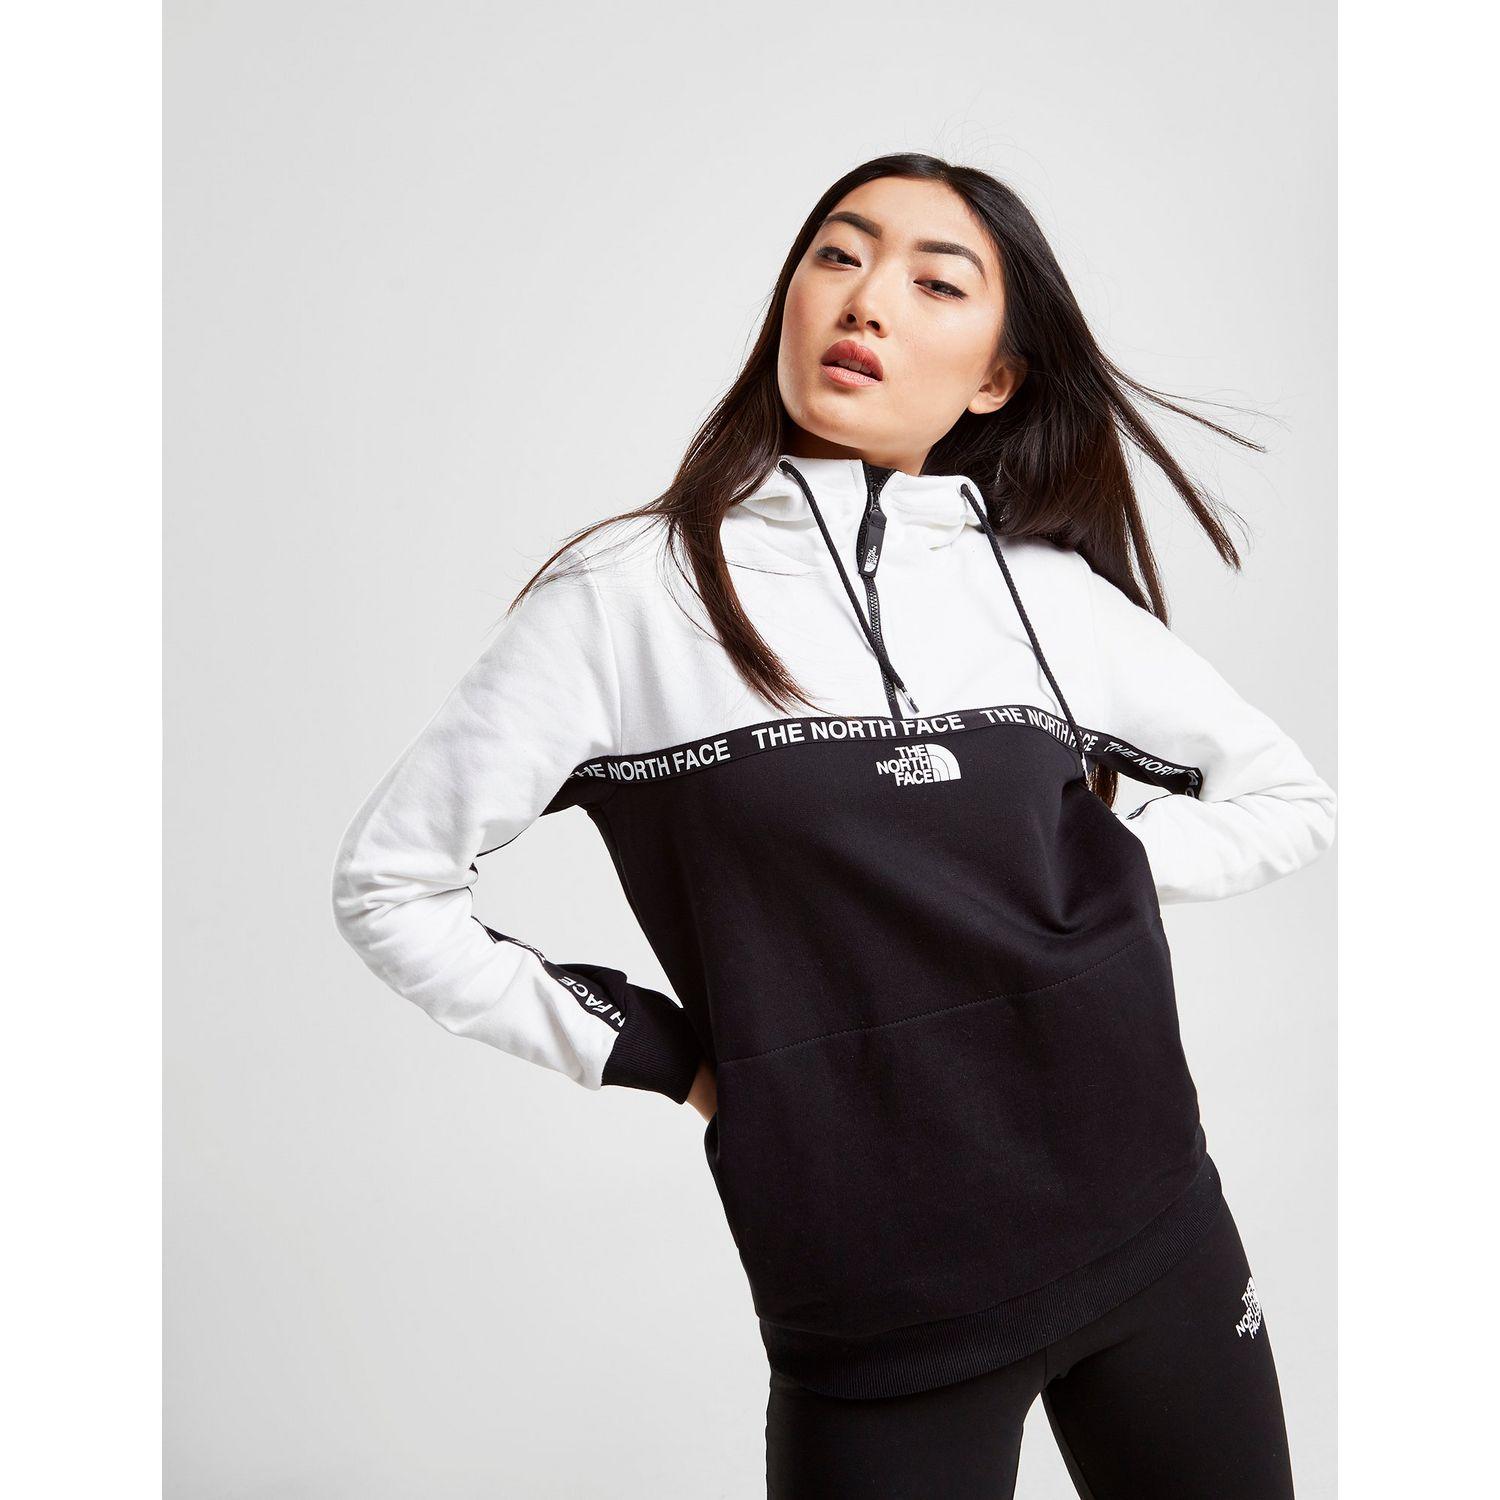 The North Face Cotton Tape 1/4 Zip Hoodie in Black/White (Black) - Lyst